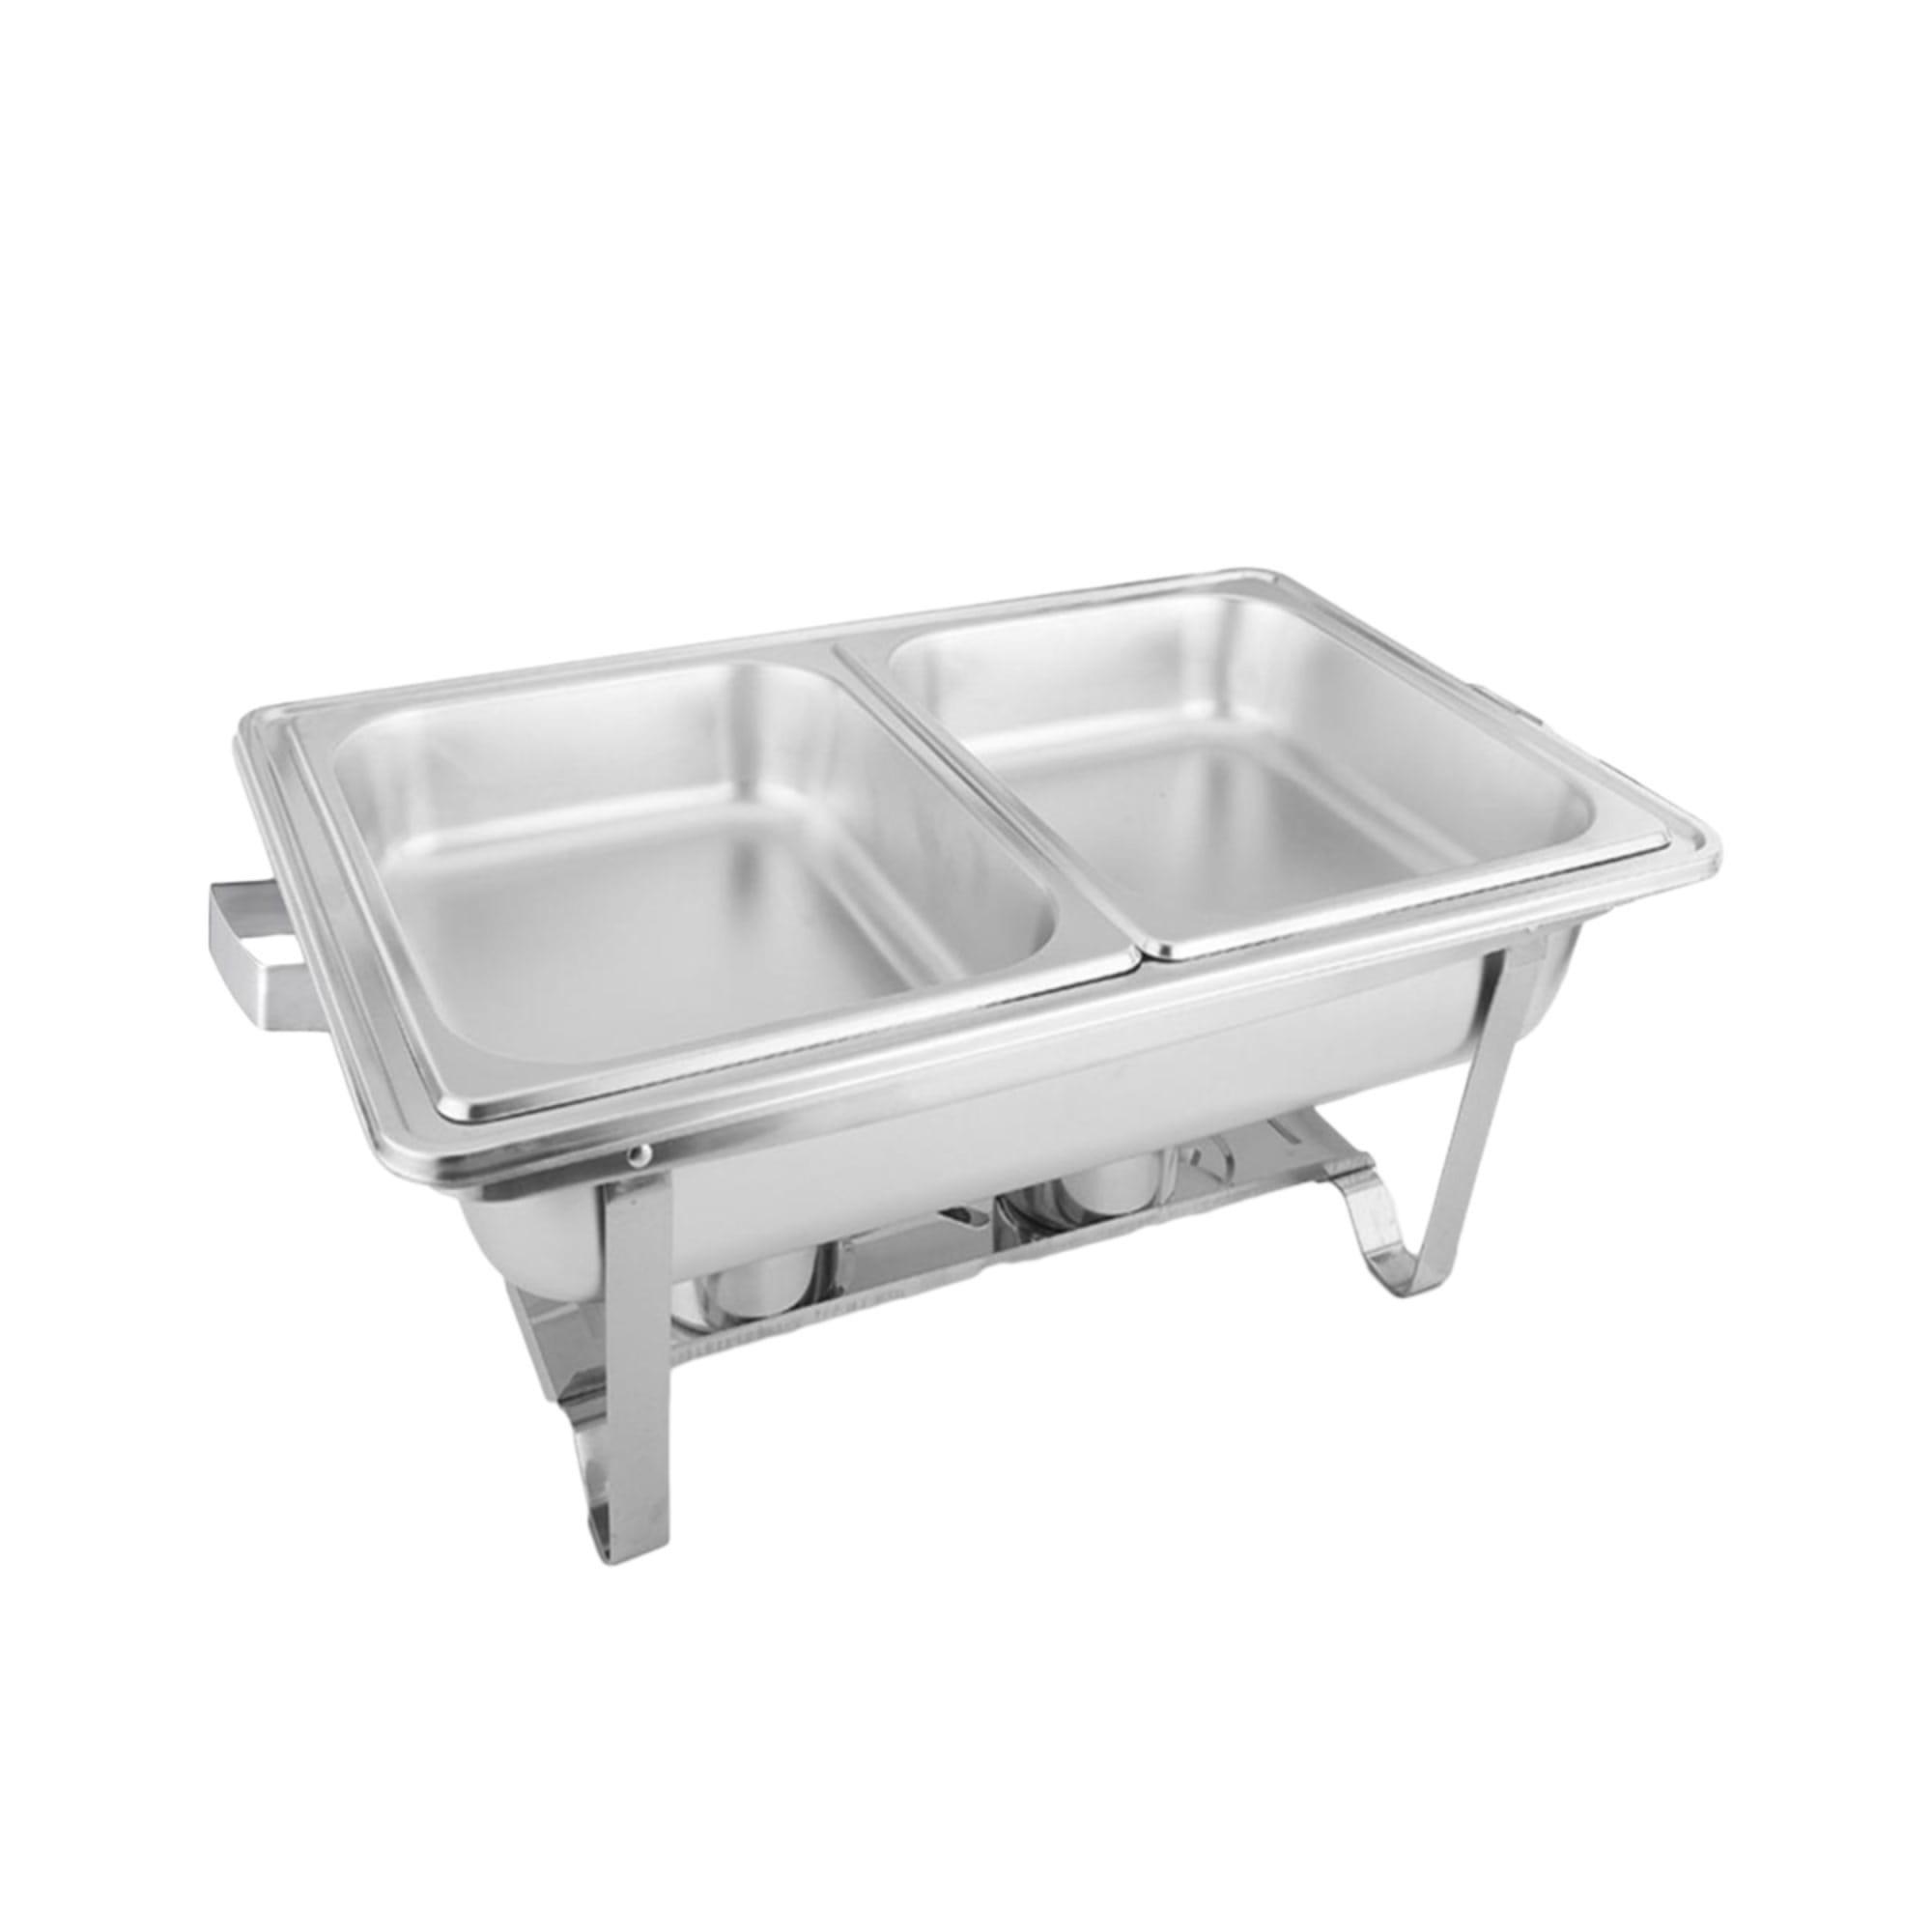 Soga Rectangular Stainless Steel Dual Tray Chafing Dish Image 3